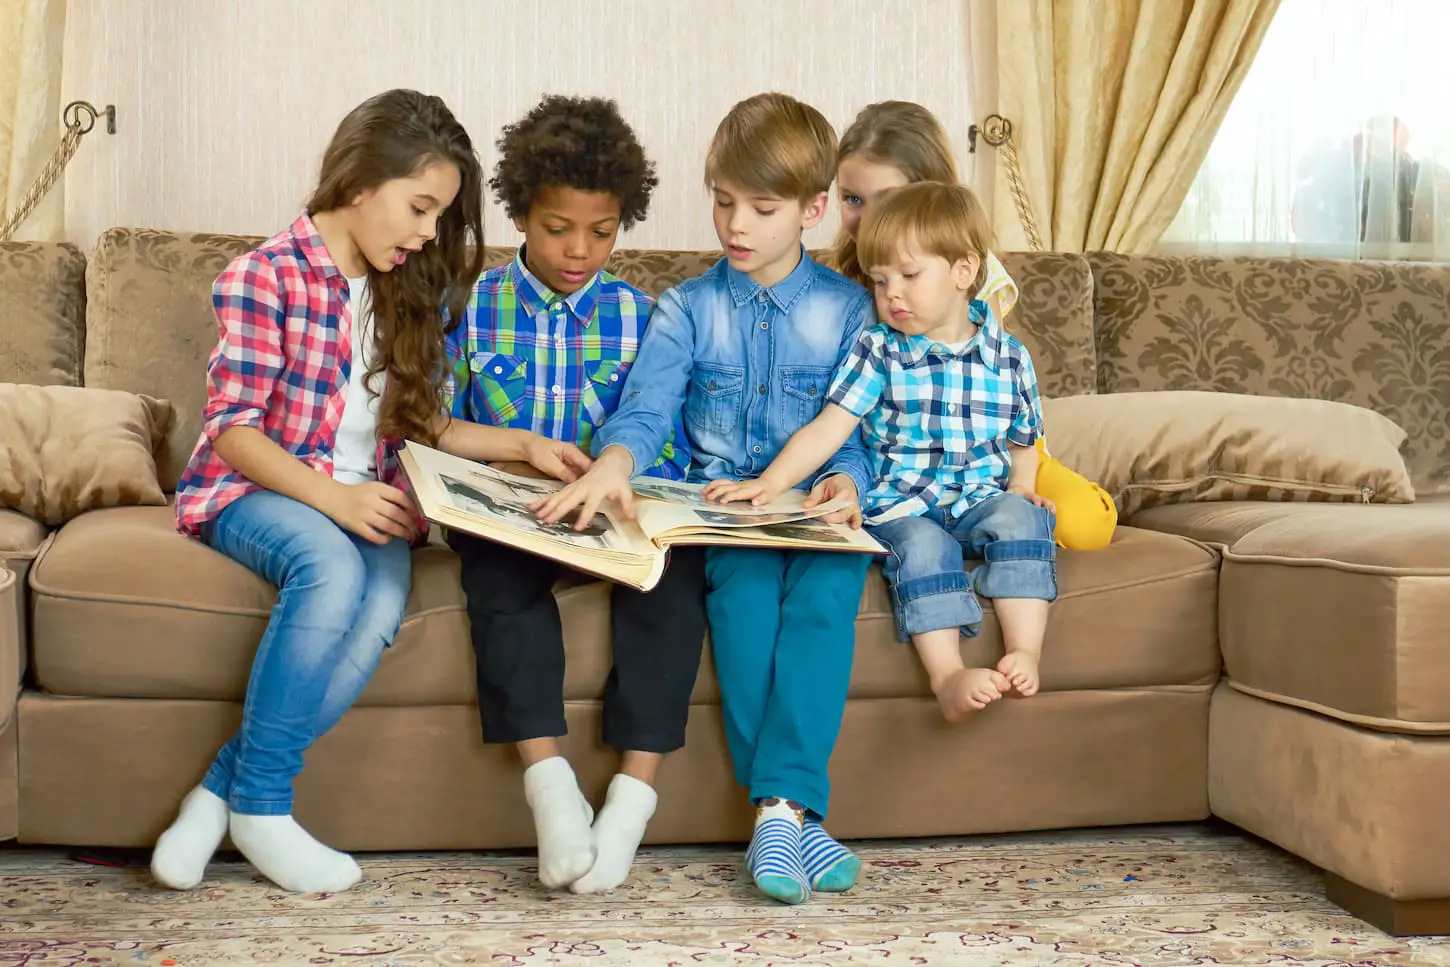 An image of kids in a room looking through a photo album.